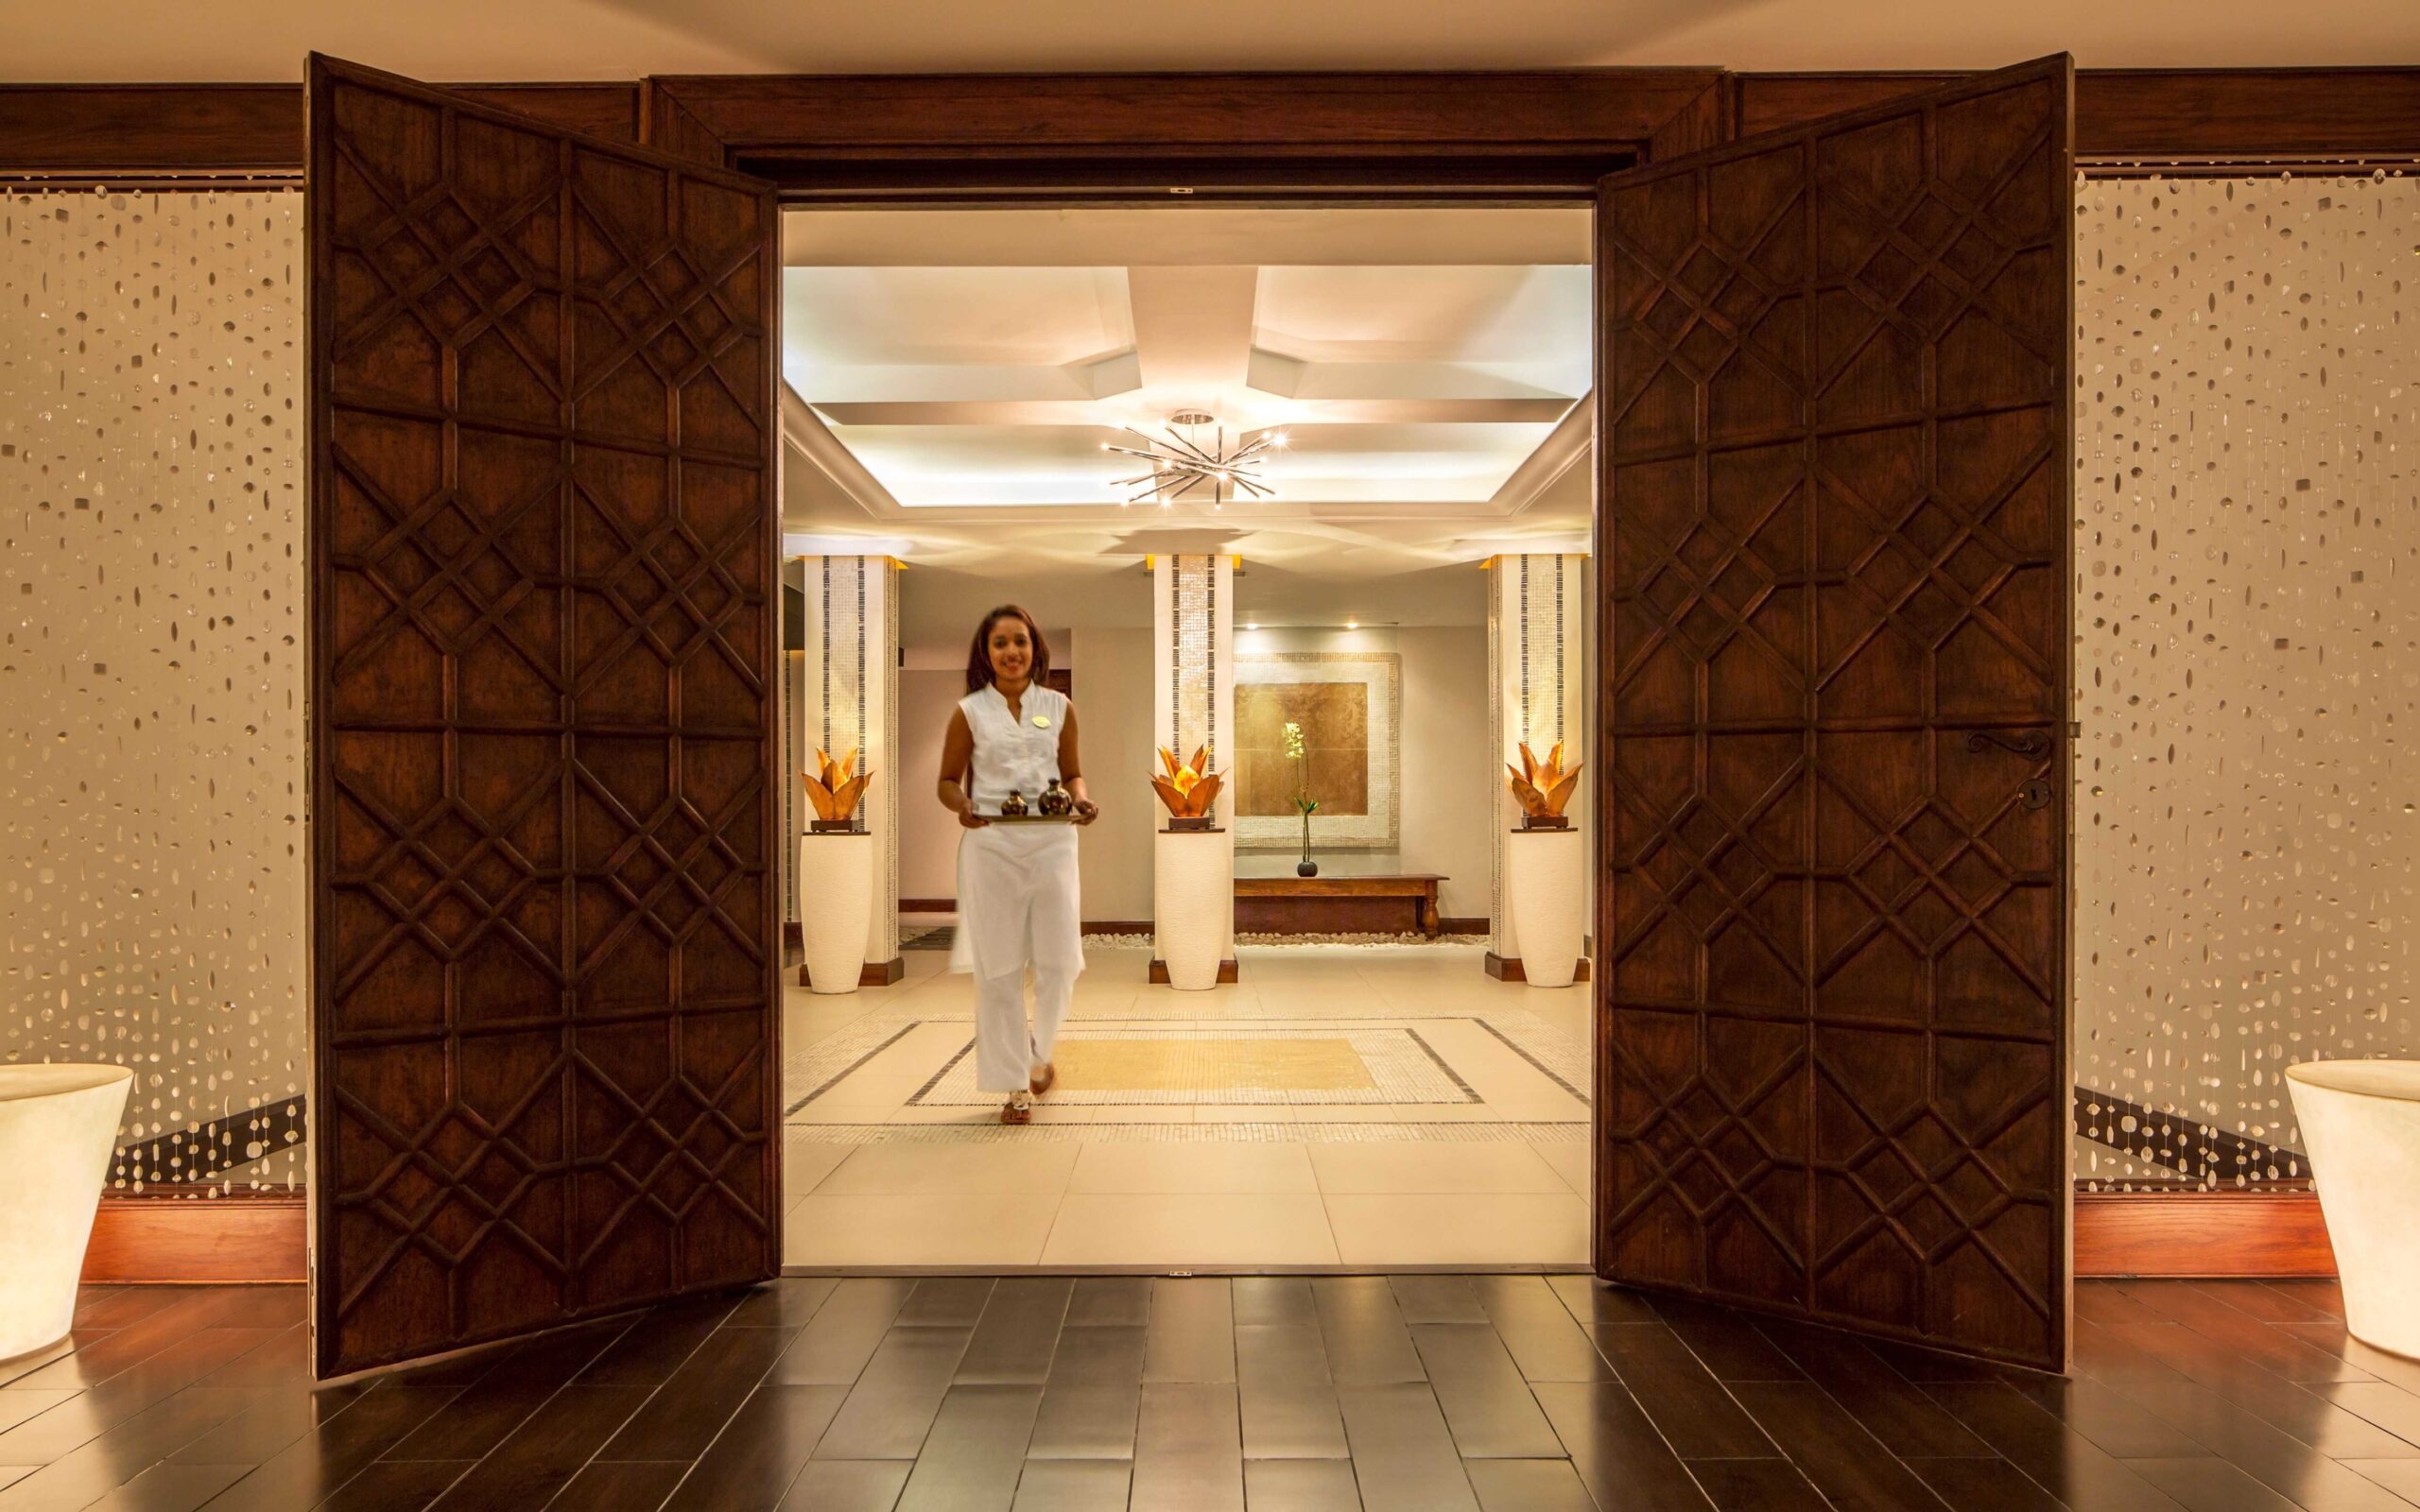 The Residence Mauritius has created new wellness programmes that are complemented by products from award-winning luxury Spanish brand Natura Bissé.